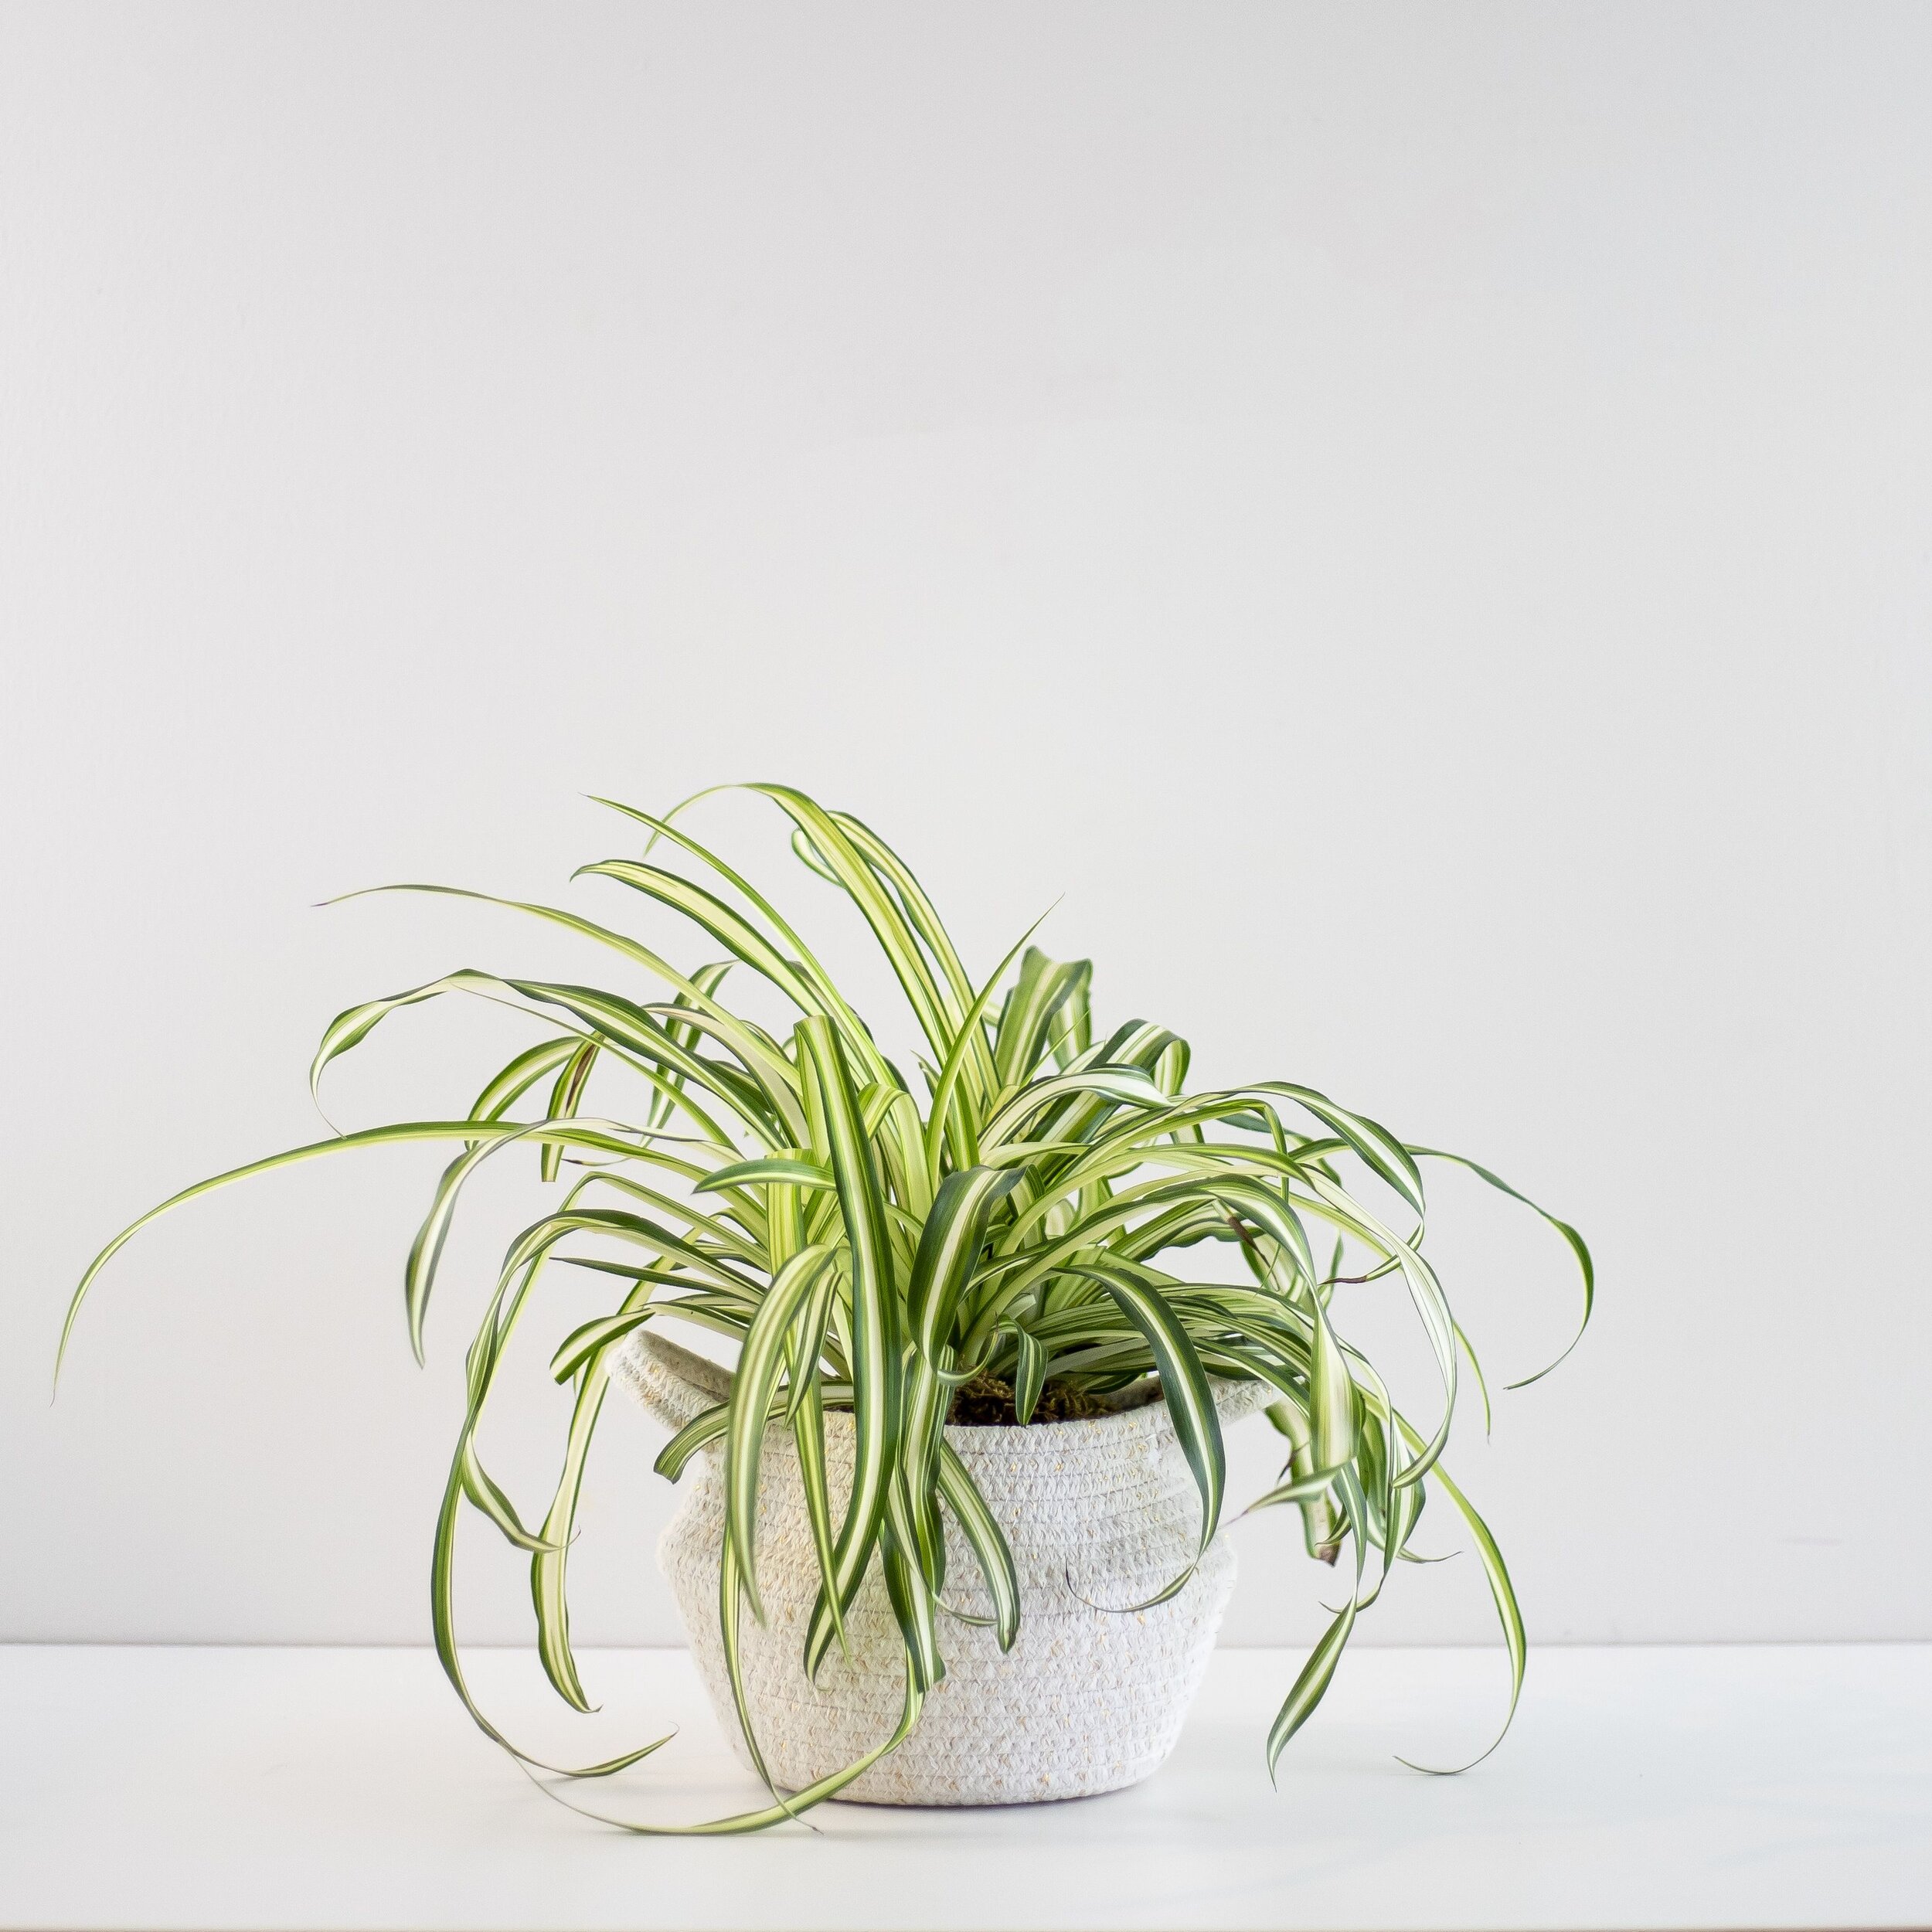 A green spider plant in a woven fabric planter sitting in front of a white background